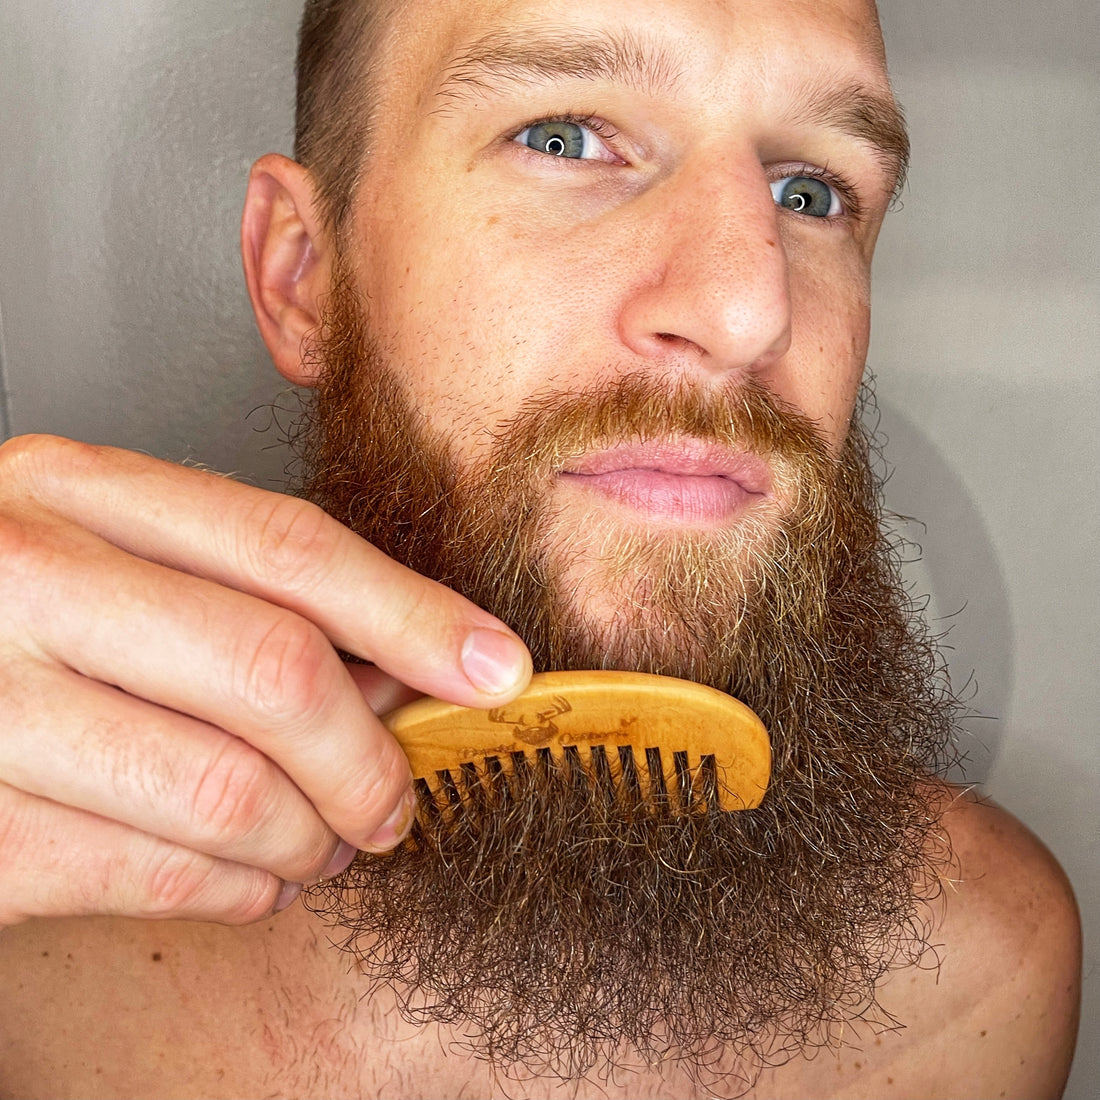 Products We Recommend For Your Beard and How to Use Them